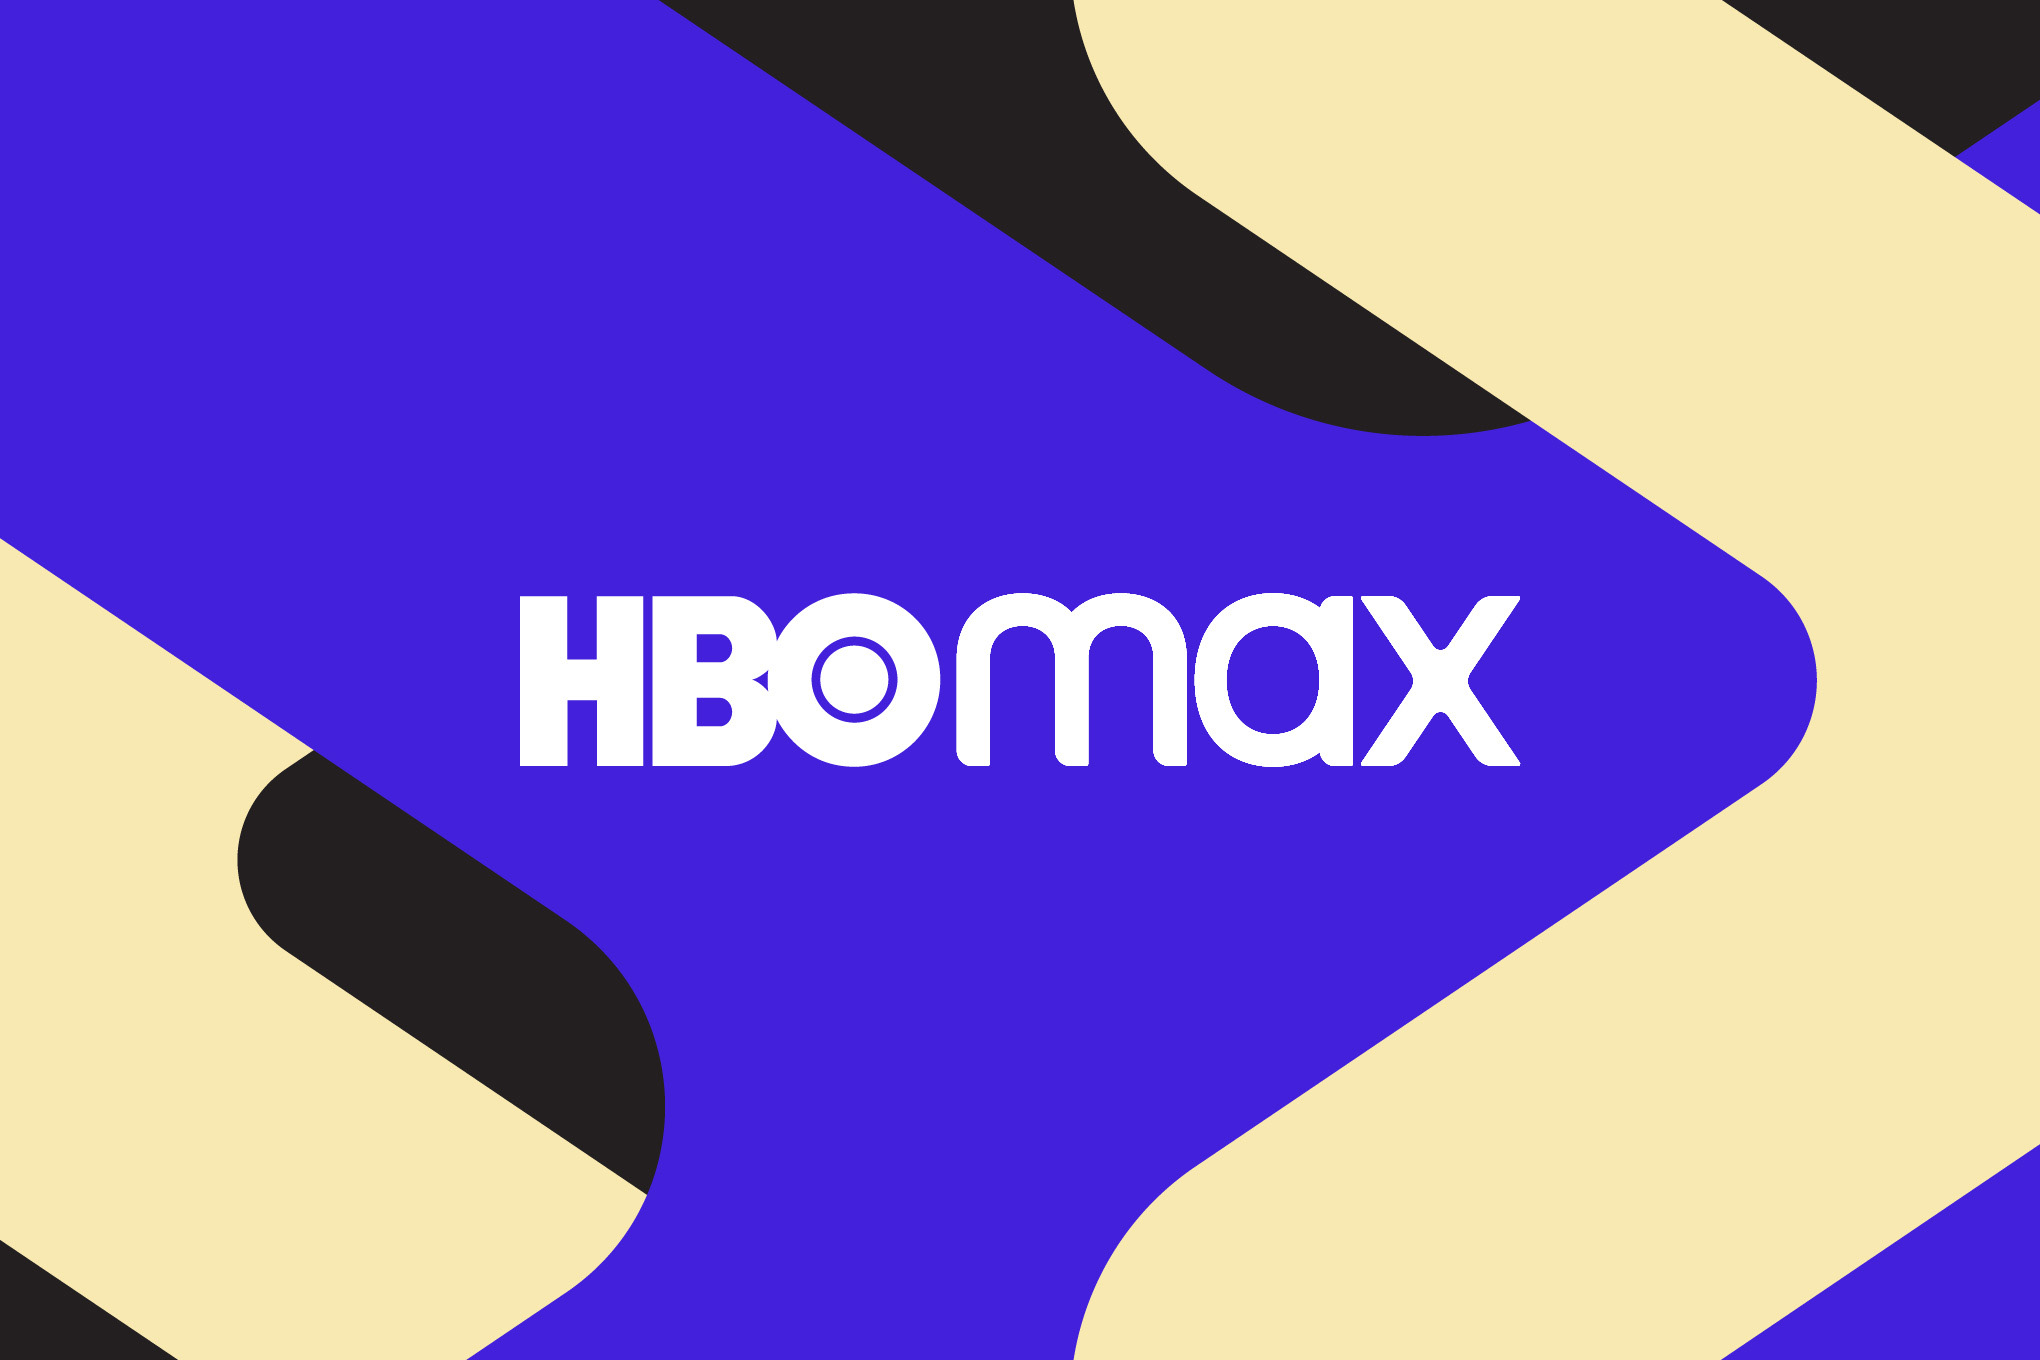 Illustration of the HBO Max wordmark on a blue, black, and tan background.